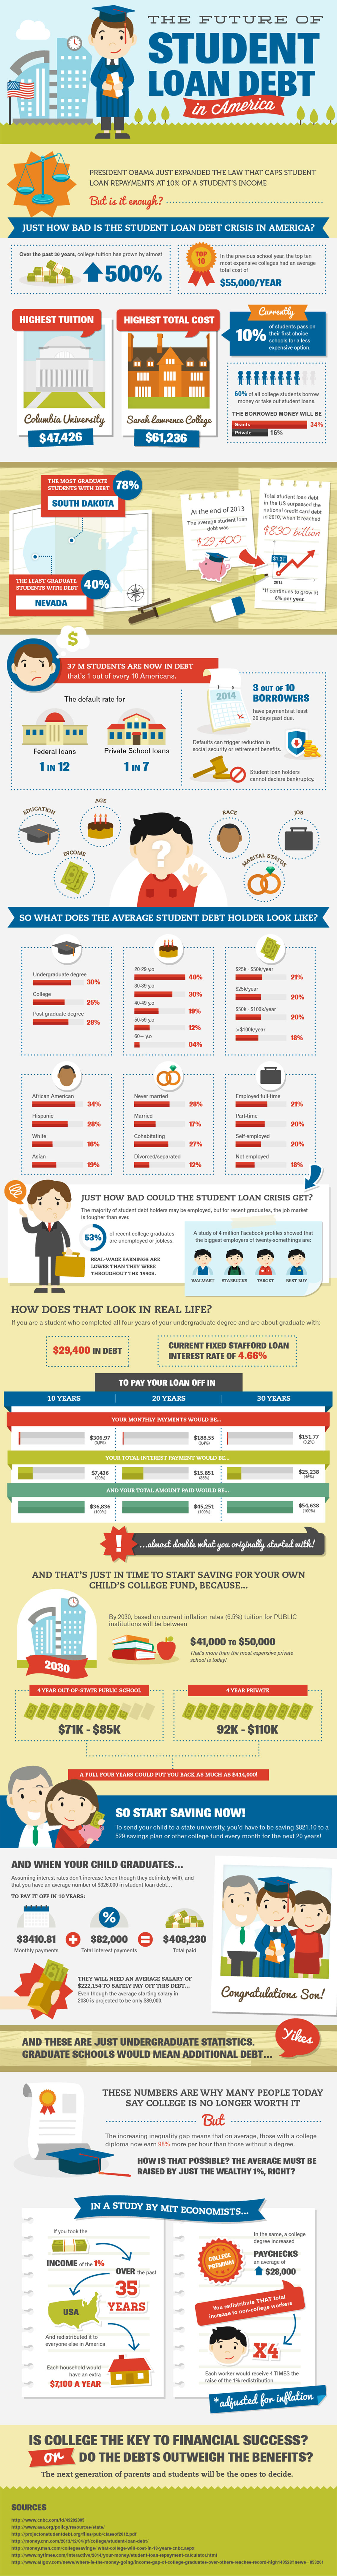 The Future of Student Loan Debt in America Infographic